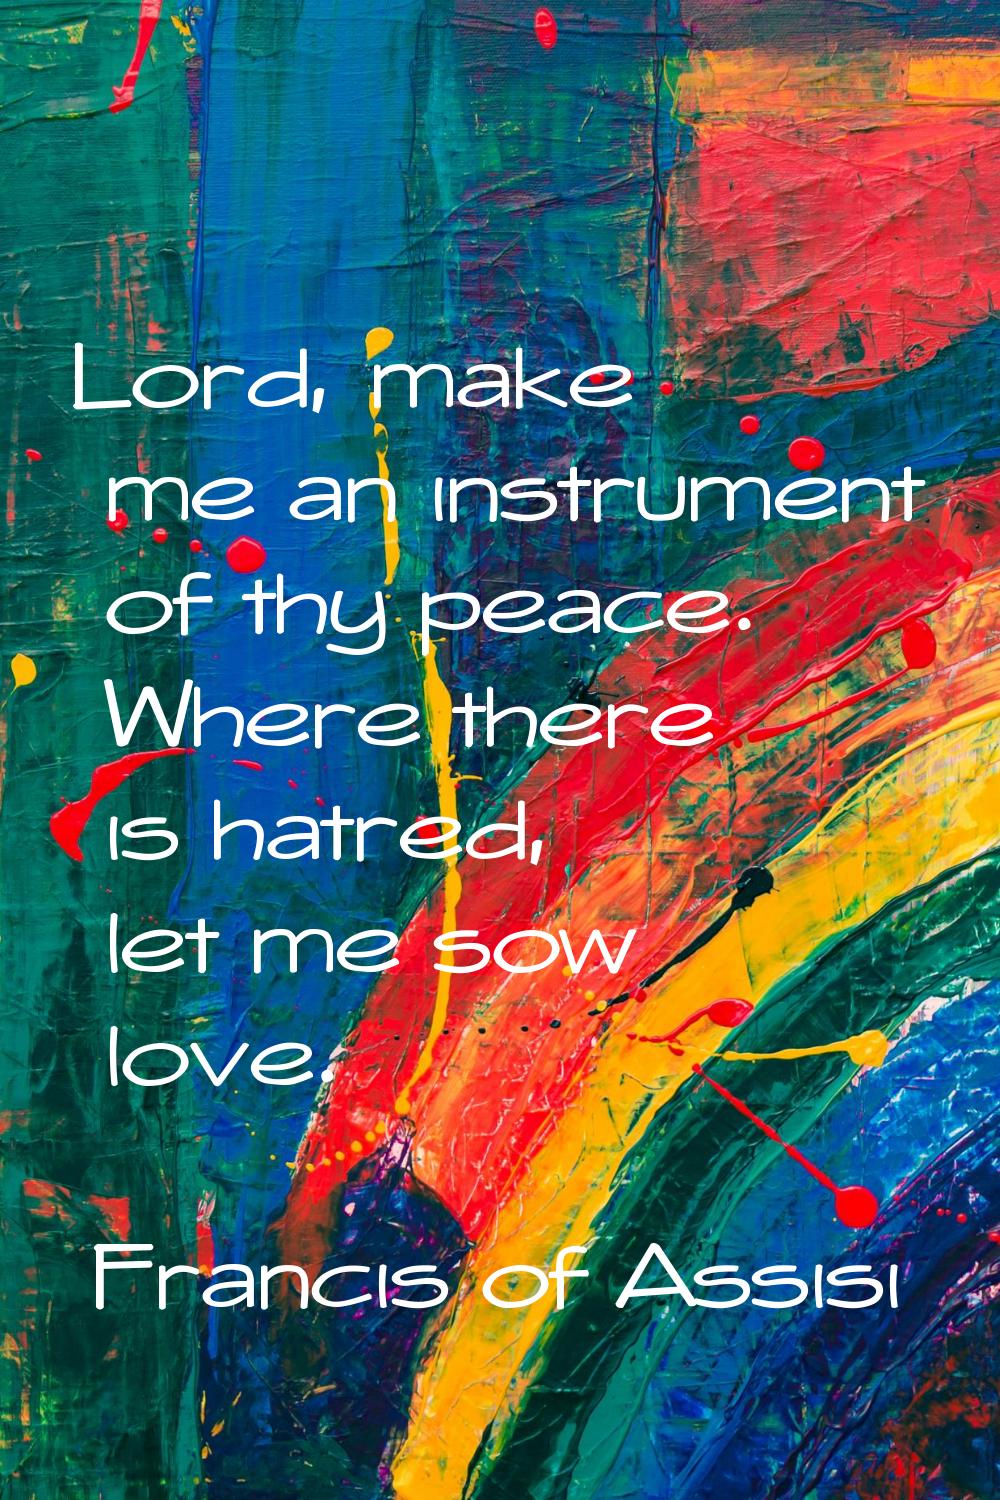 Lord, make me an instrument of thy peace. Where there is hatred, let me sow love.